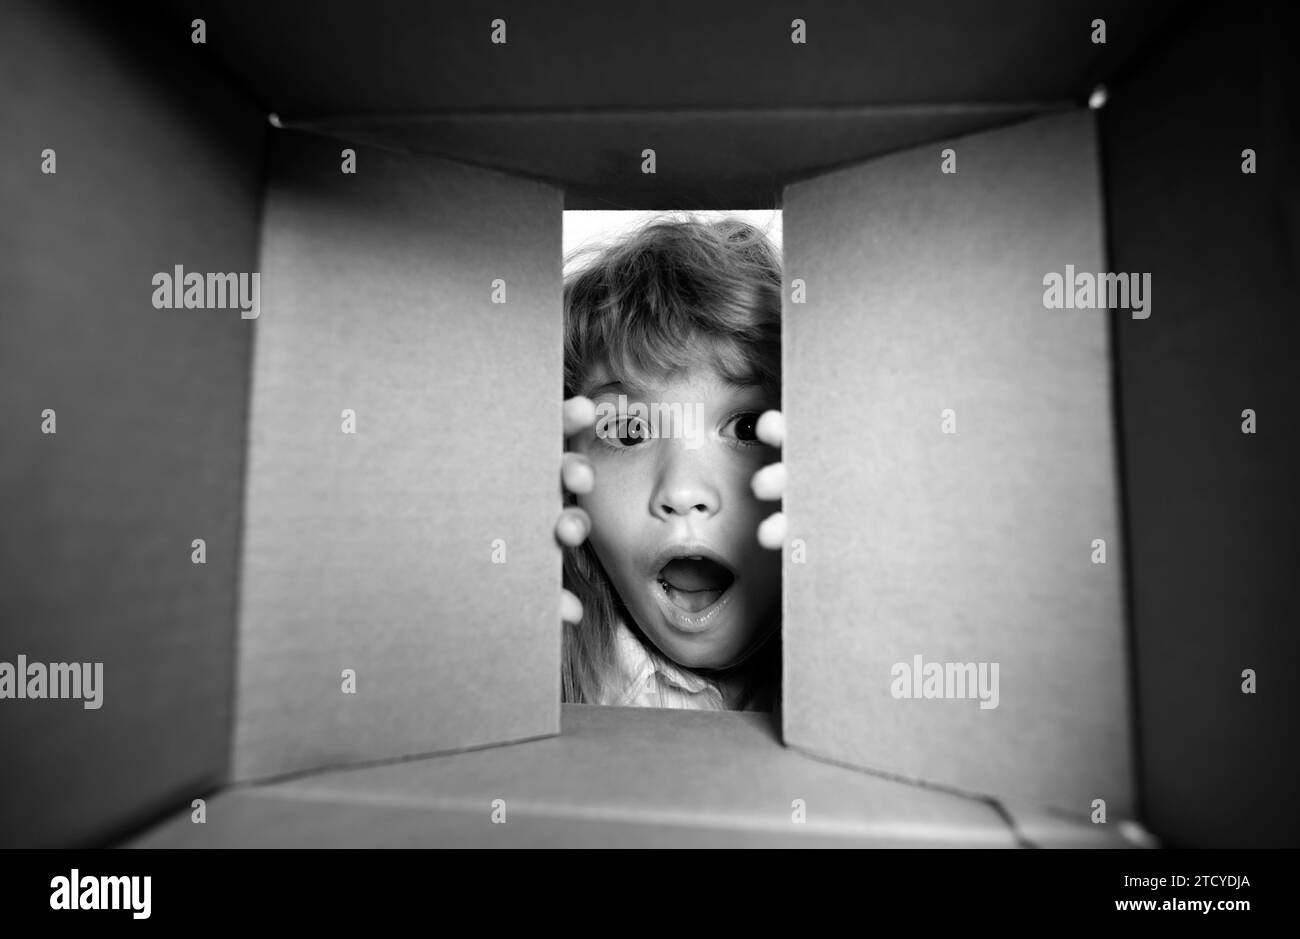 Kid opening package. Child boy age 6 year opening a carton box and looking inside, unpacking concept, surprise unboxing. Stock Photo